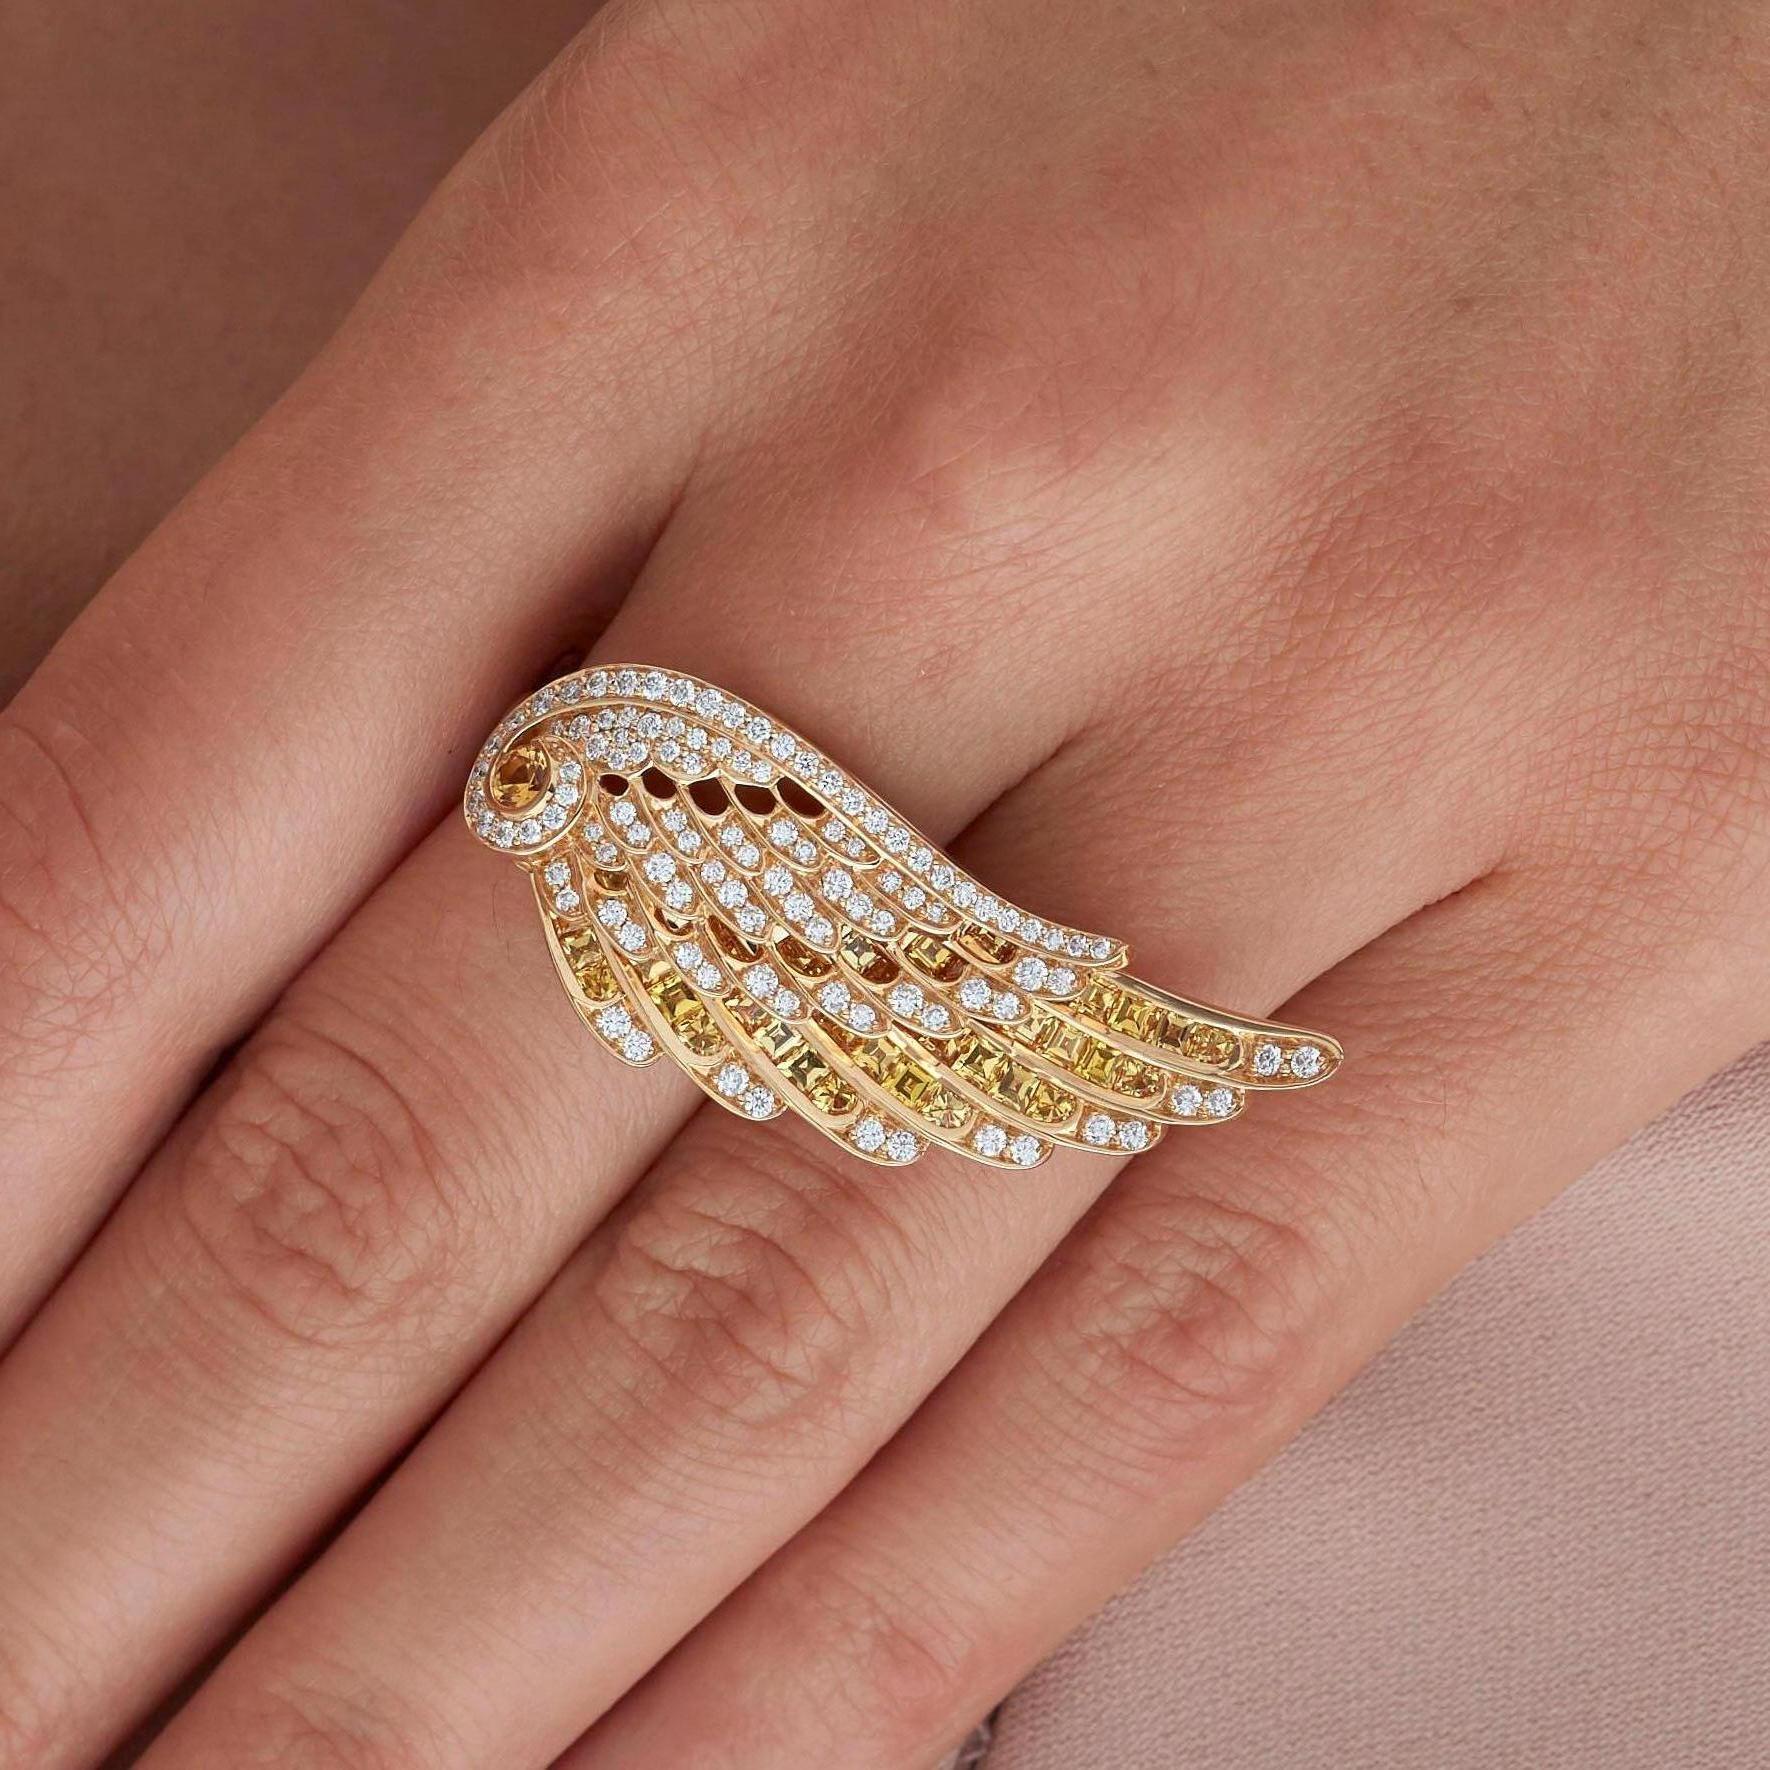 A House of Garrard 18 karat yellow gold ring from the 'Wings Embrace' collection with a cross- finger double wing motif, set with round white diamonds and round and calibre cut yellow sapphires.

106 round white diamonds weighing: 0.78cts
1 round